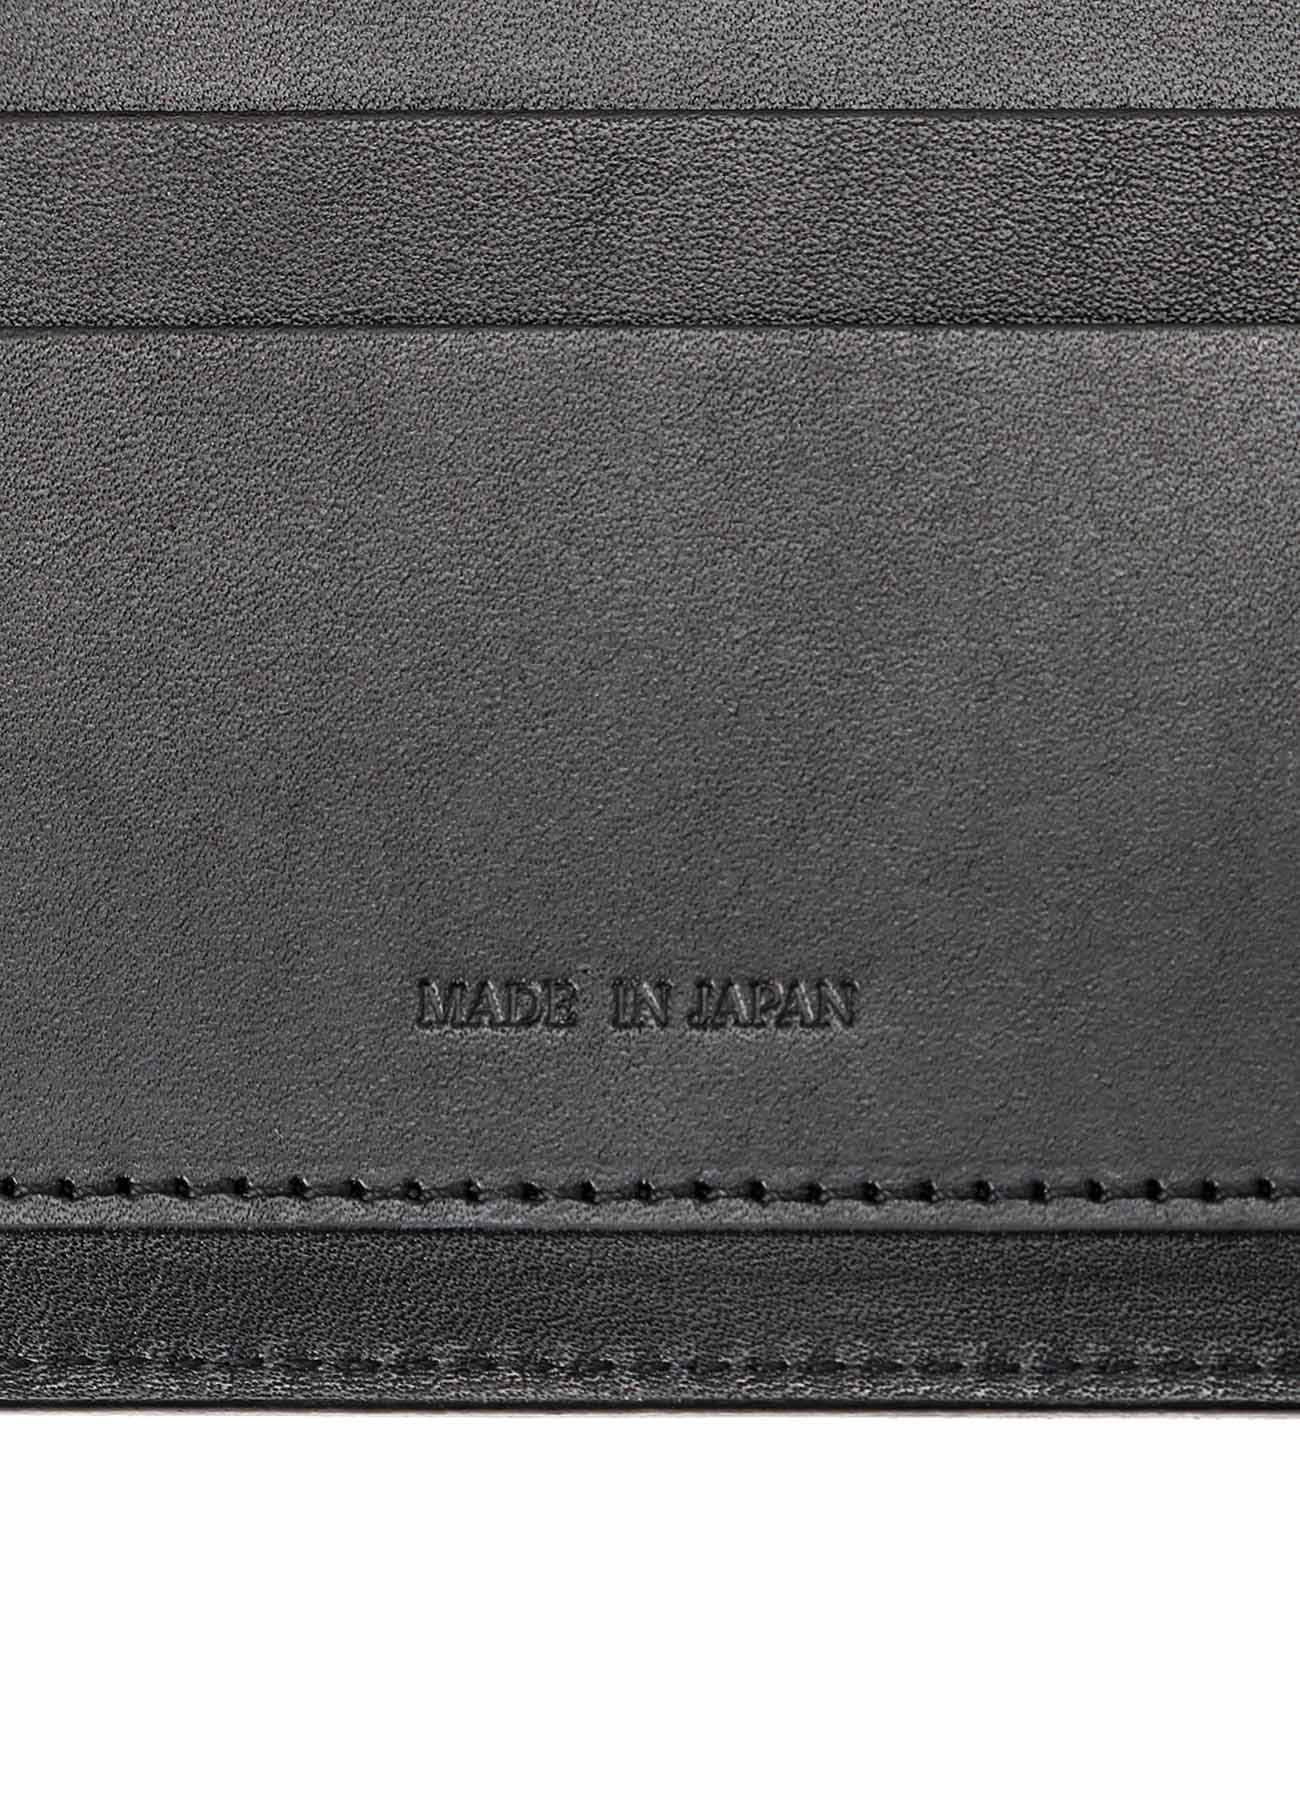 GOTHIC COE LEATHER WALLET